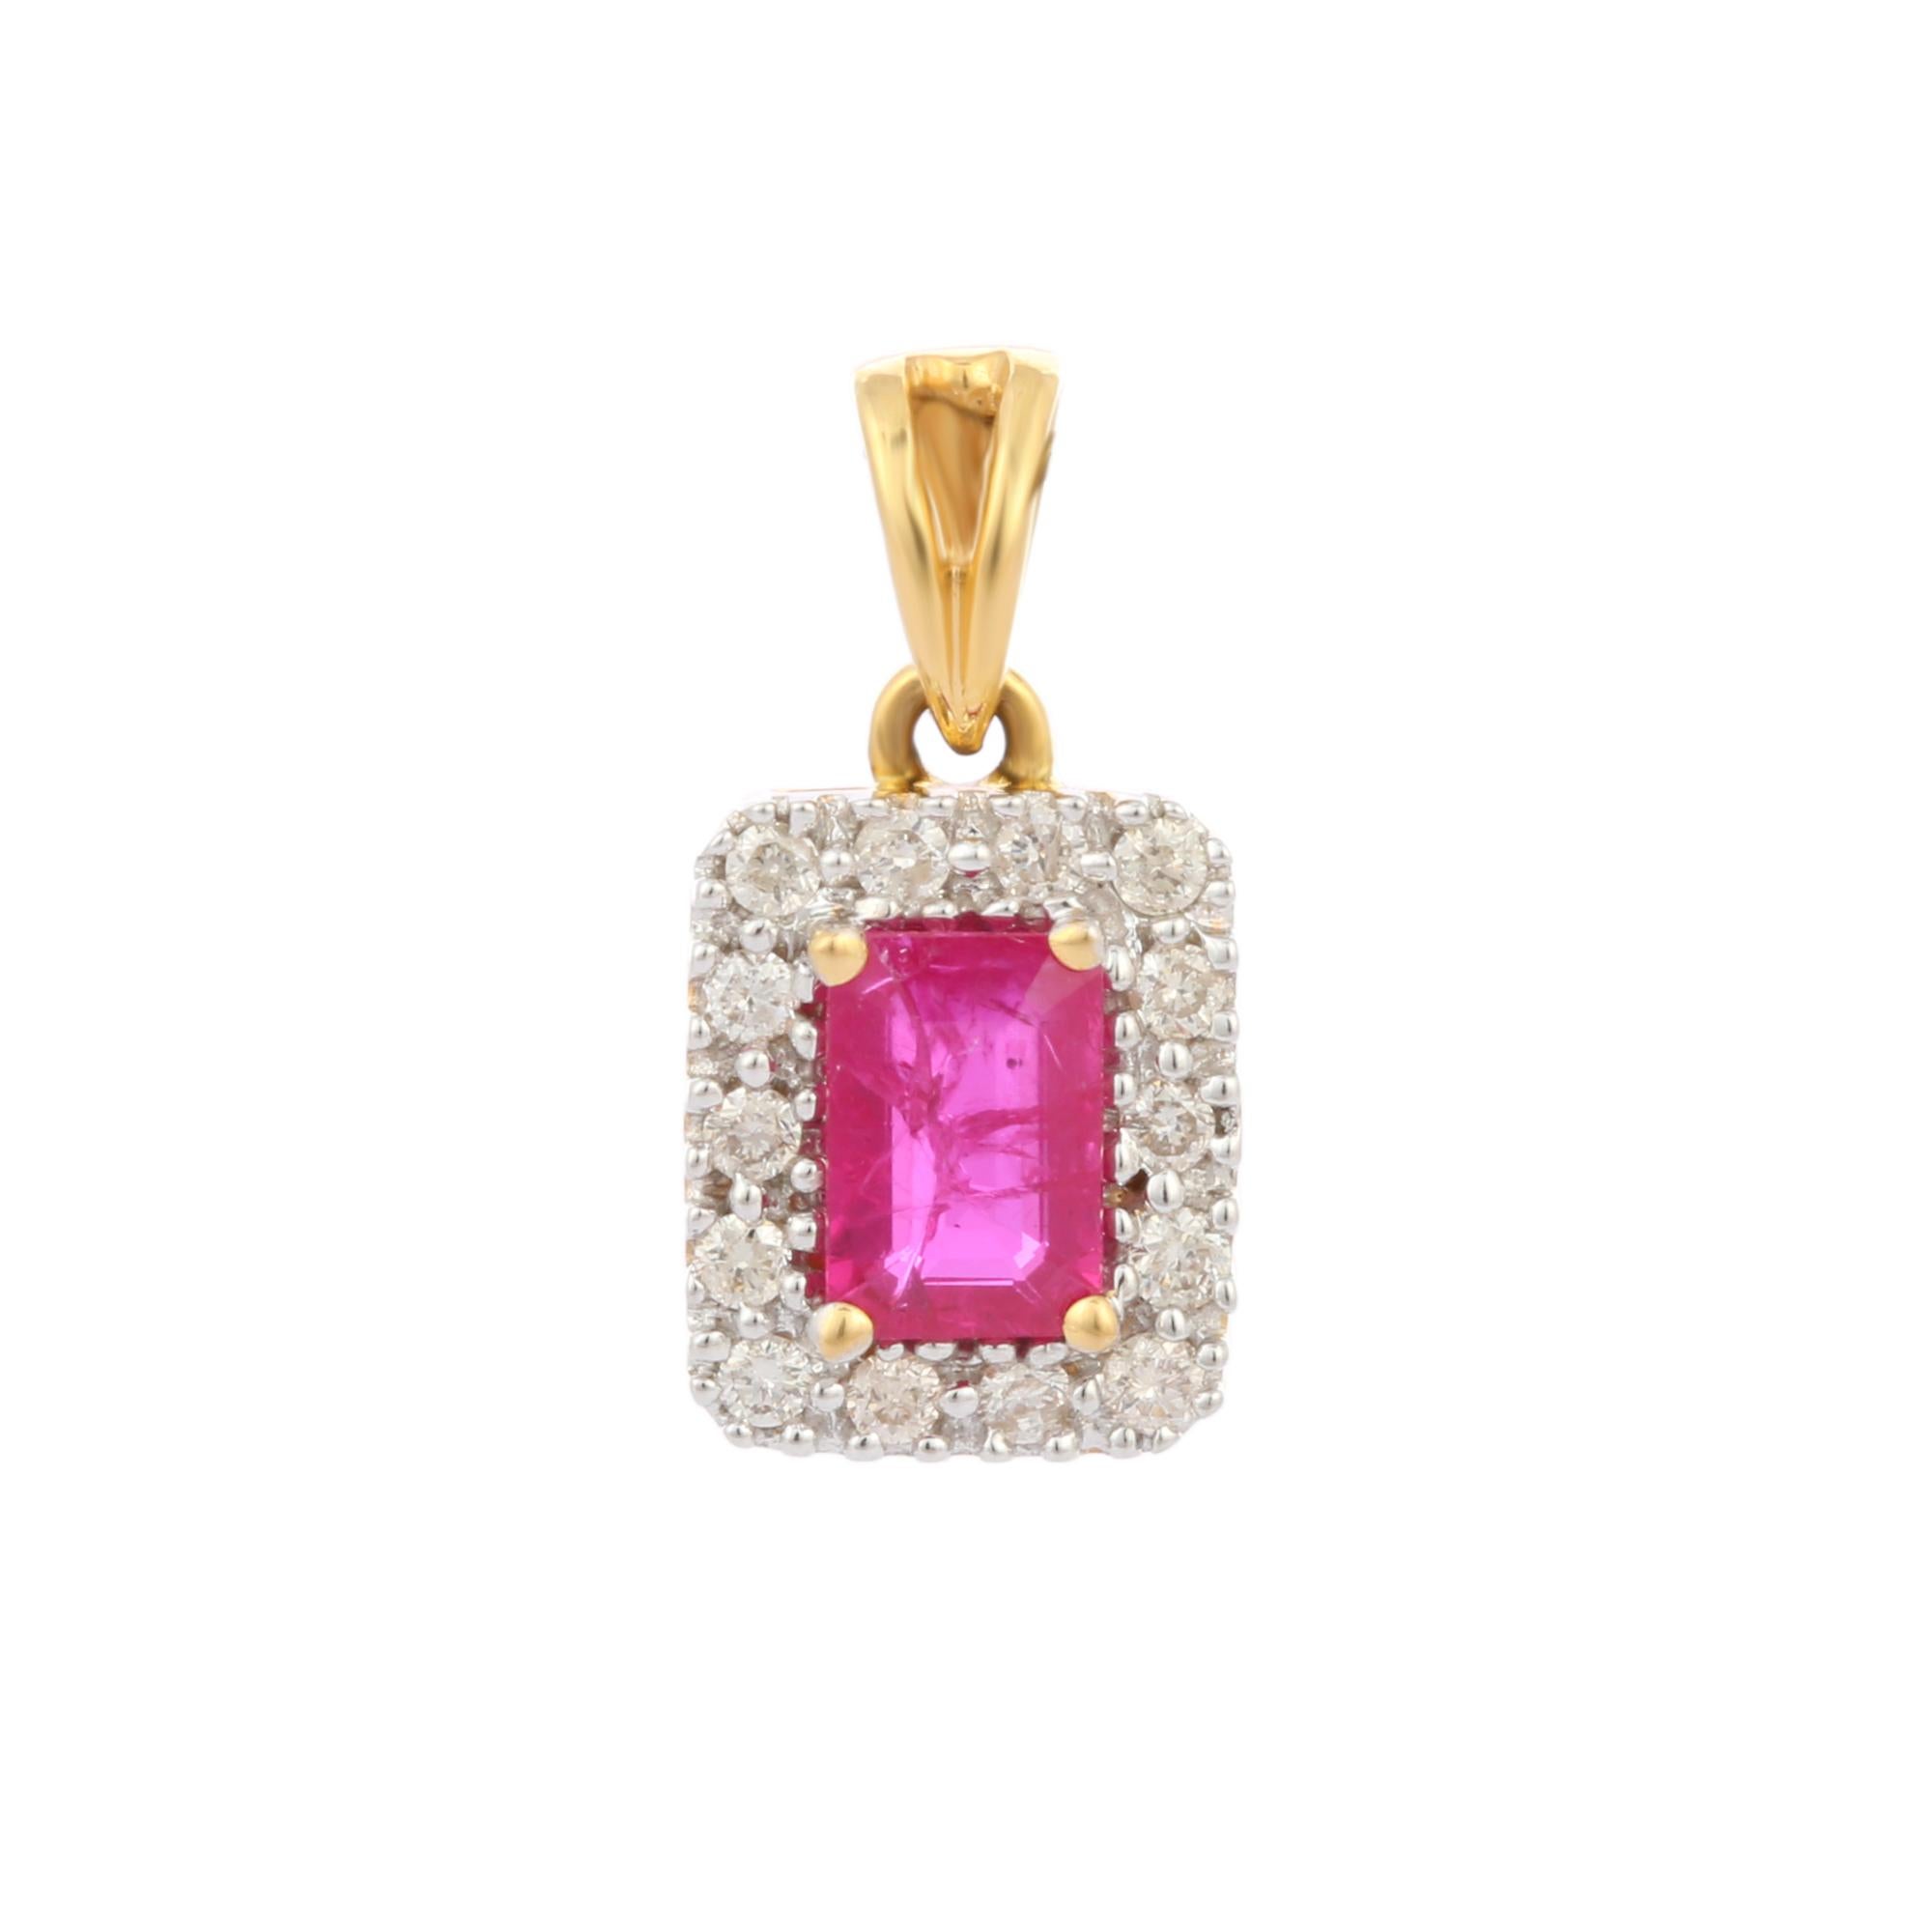  Halo Diamond Ruby Pendant in 18K Gold. It has a octagon cut ruby with diamonds that completes your look with a decent touch. Pendants are used to wear or gifted to represent love and promises. It's an attractive jewelry piece that goes with every